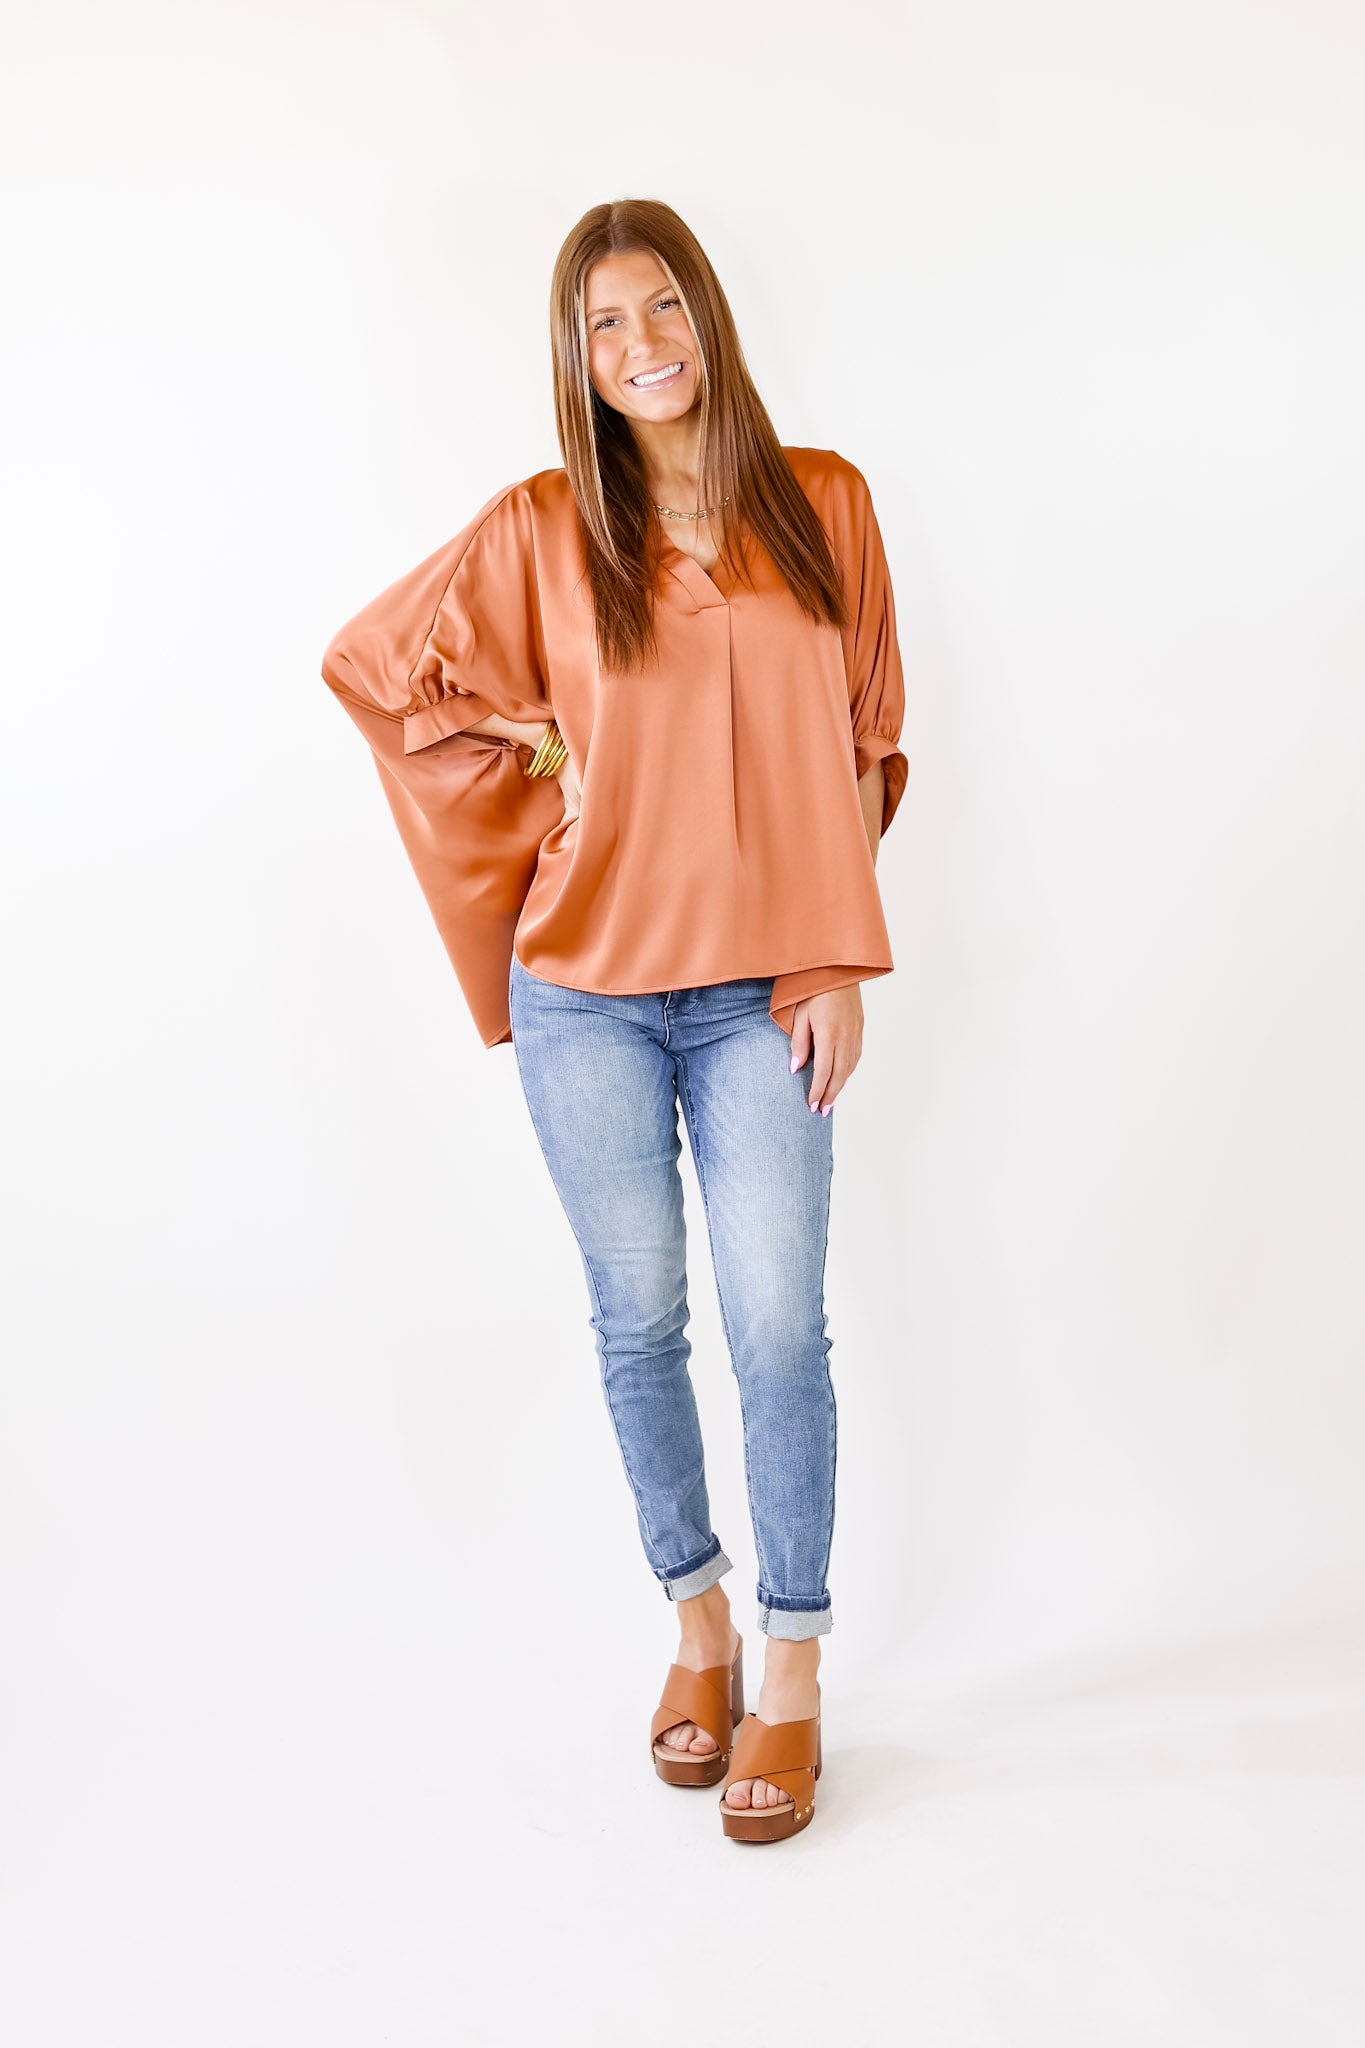 Irresistibly Chic Half Sleeve Oversized Blouse in Copper - Giddy Up Glamour Boutique